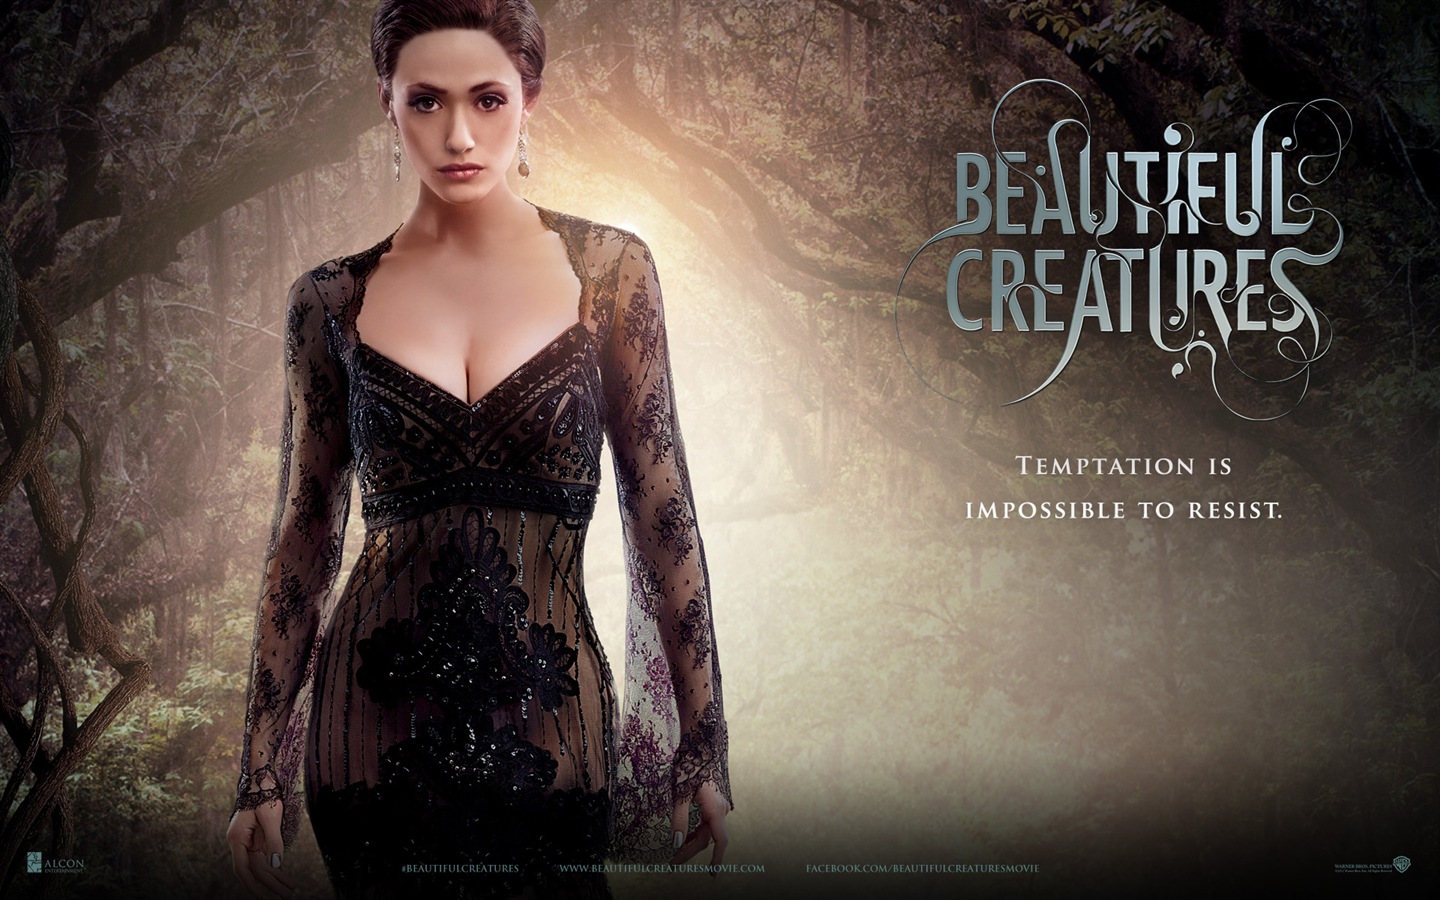 Beautiful Creatures 2013 HD movie wallpapers #16 - 1440x900